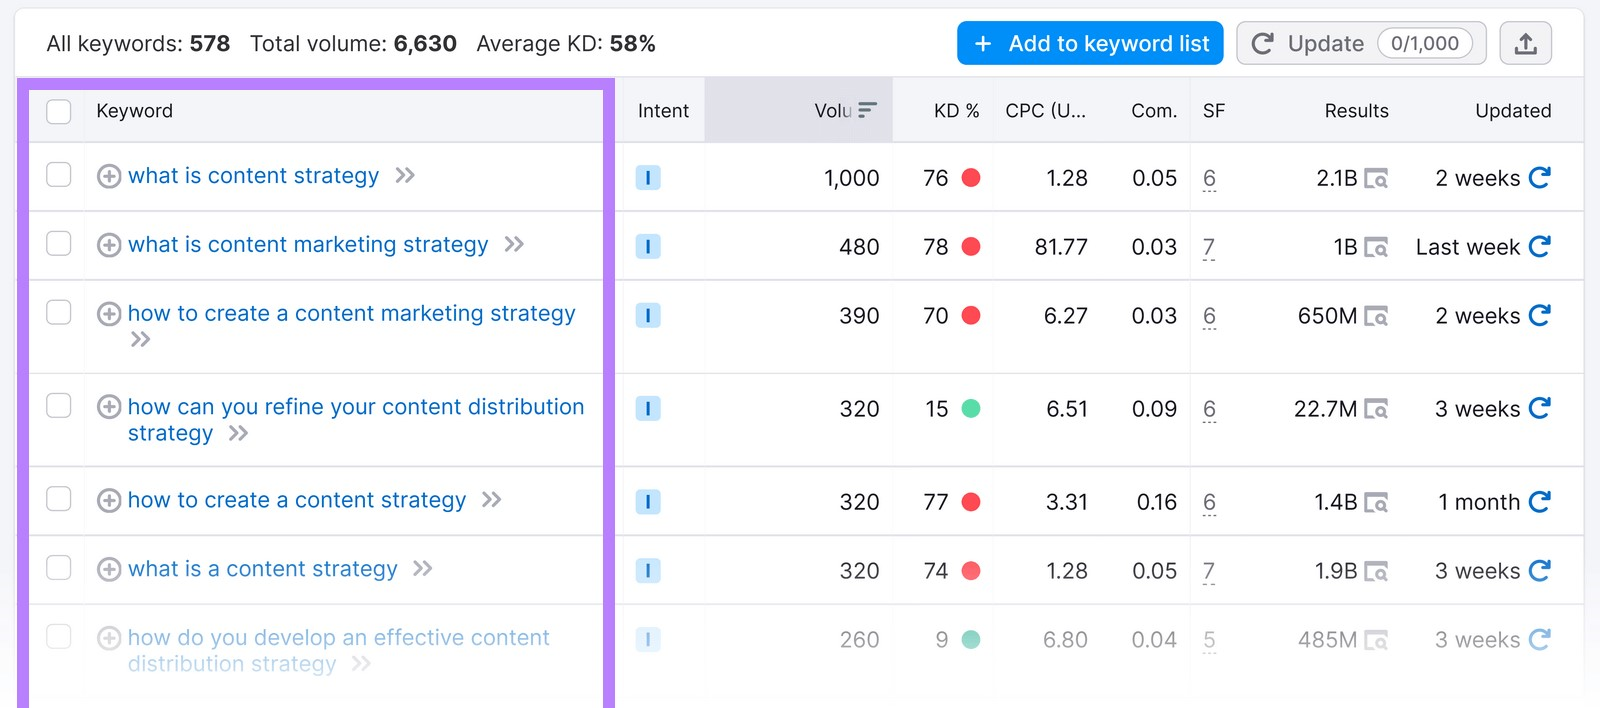 Keyword Magic Tool shows all the different queries people are searching for that include your main keyword "content strategy"